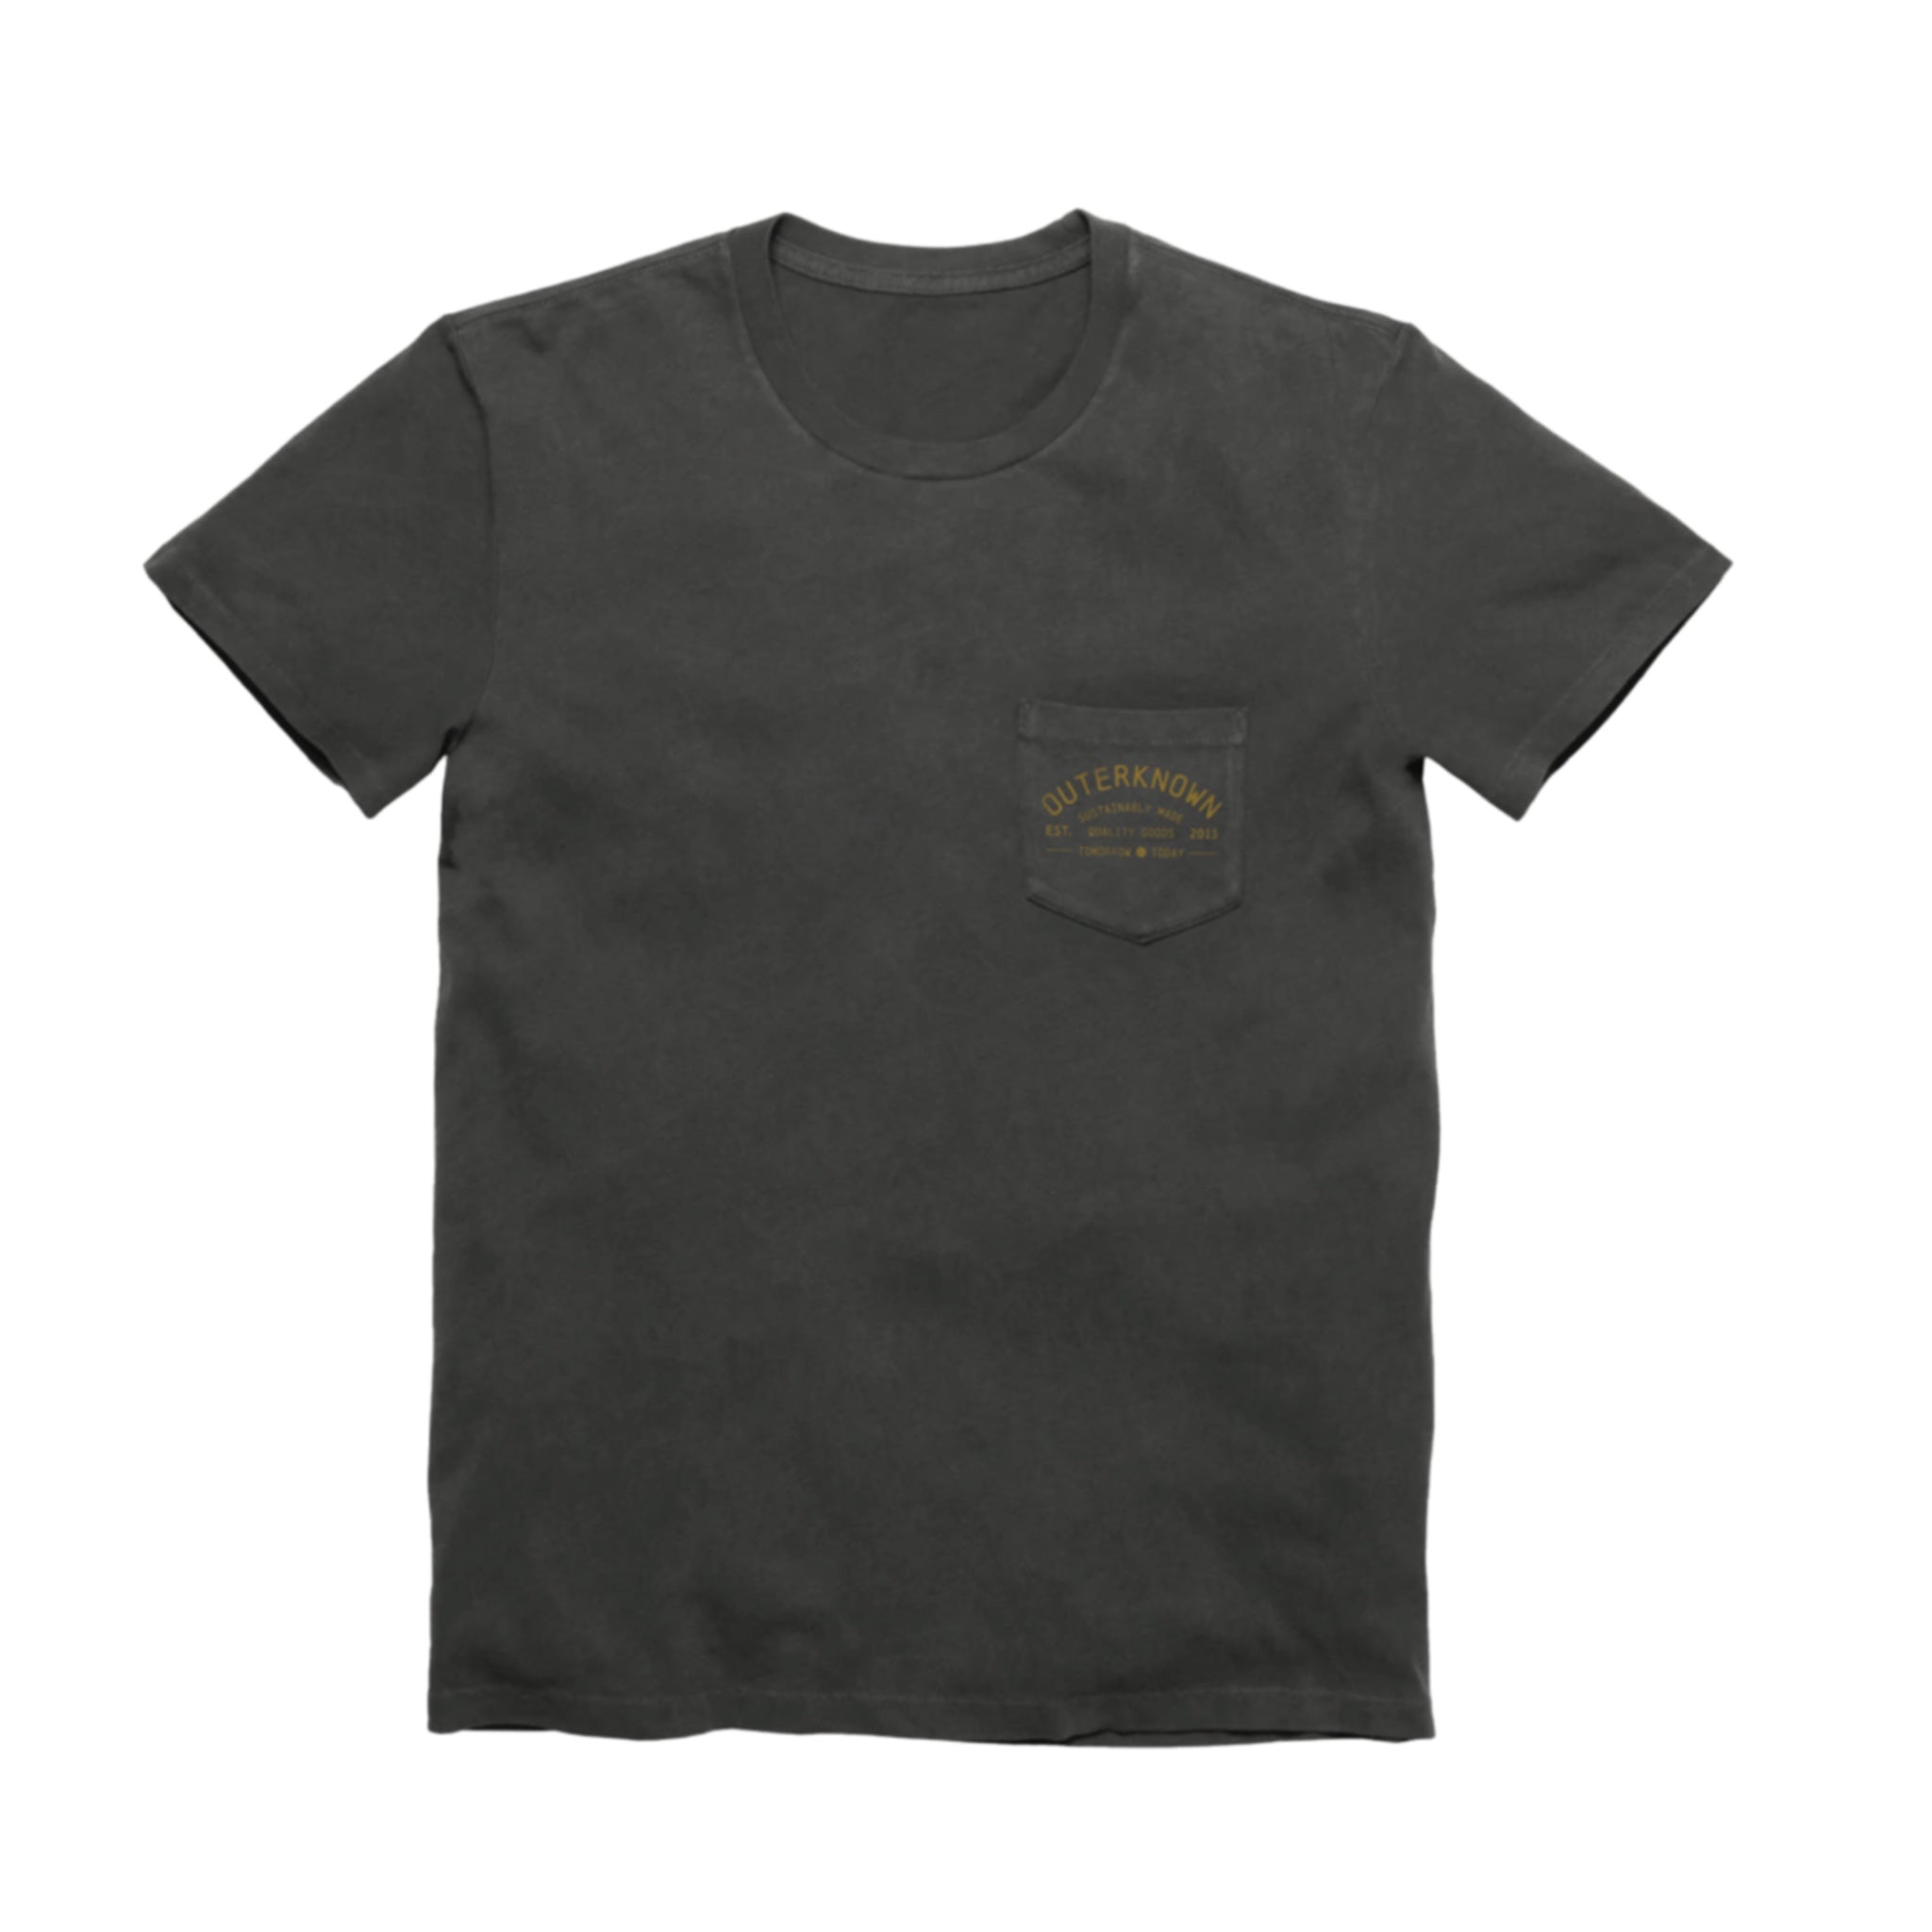 Outerknown Industrial Tee - Faded Black